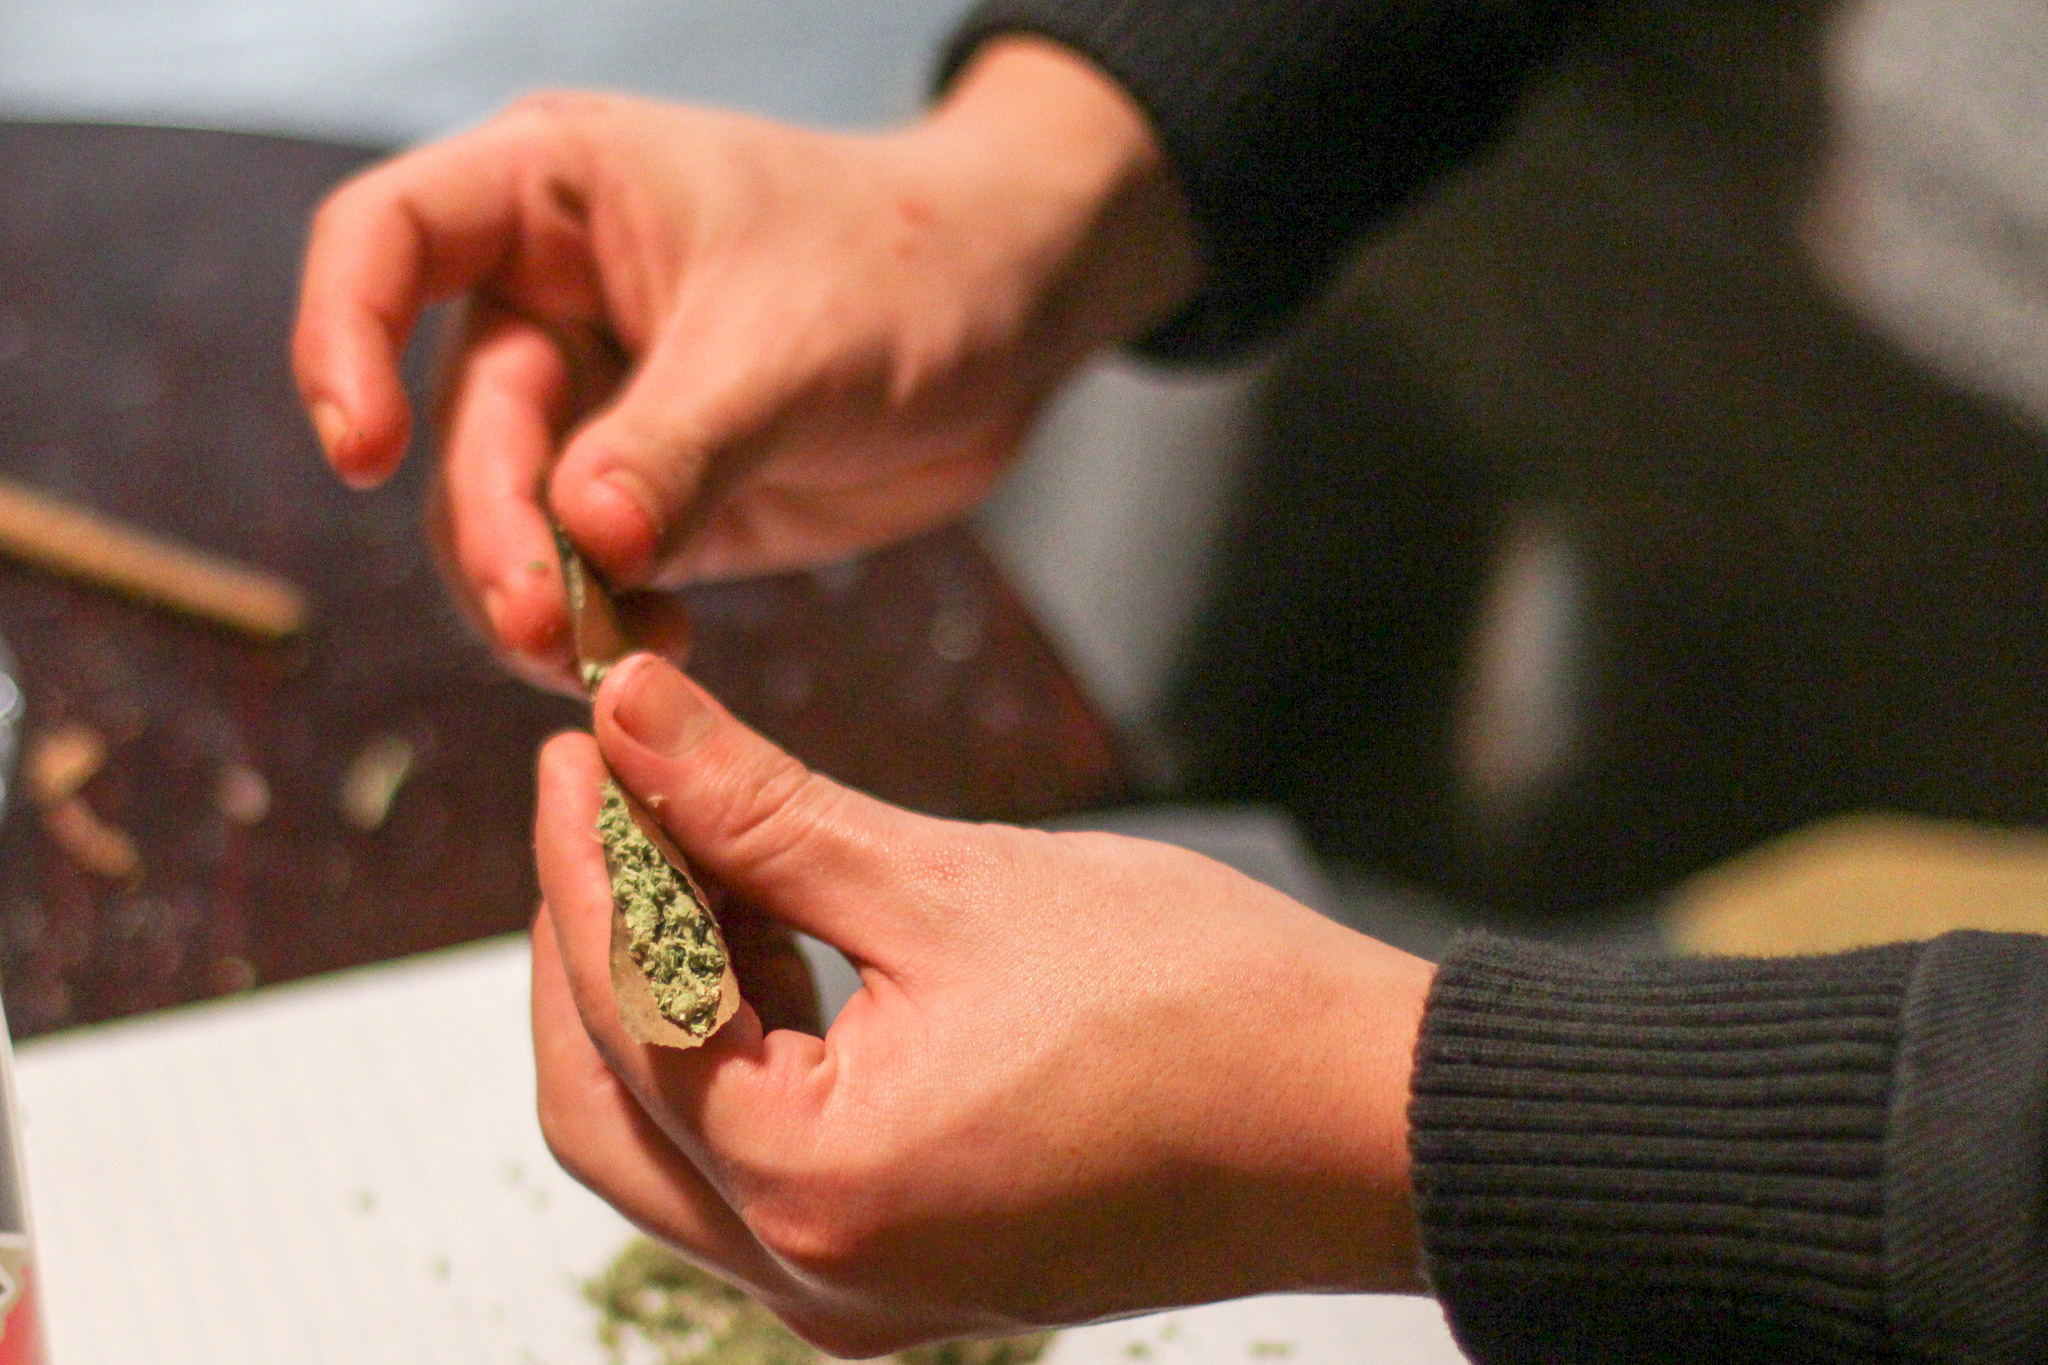 San Marcos is one step closer to getting decriminalization of weed on the  November ballot